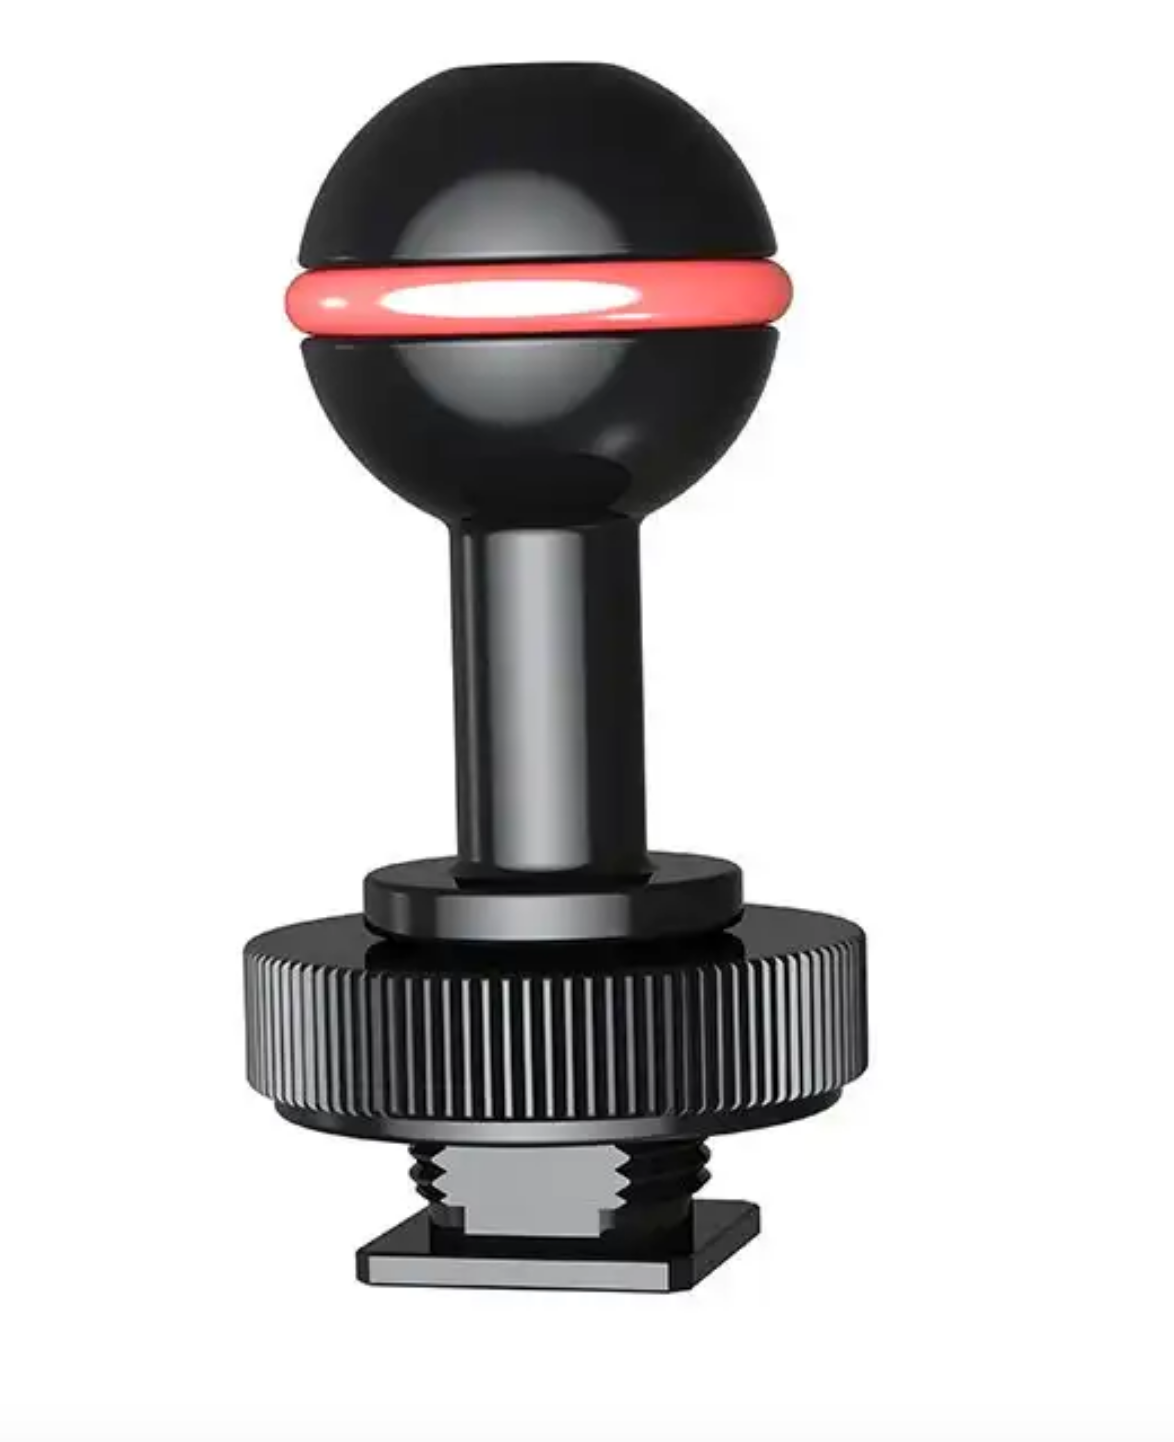 Divepro Divepro Cold Shoe ball Mount by Oyster Diving Shop